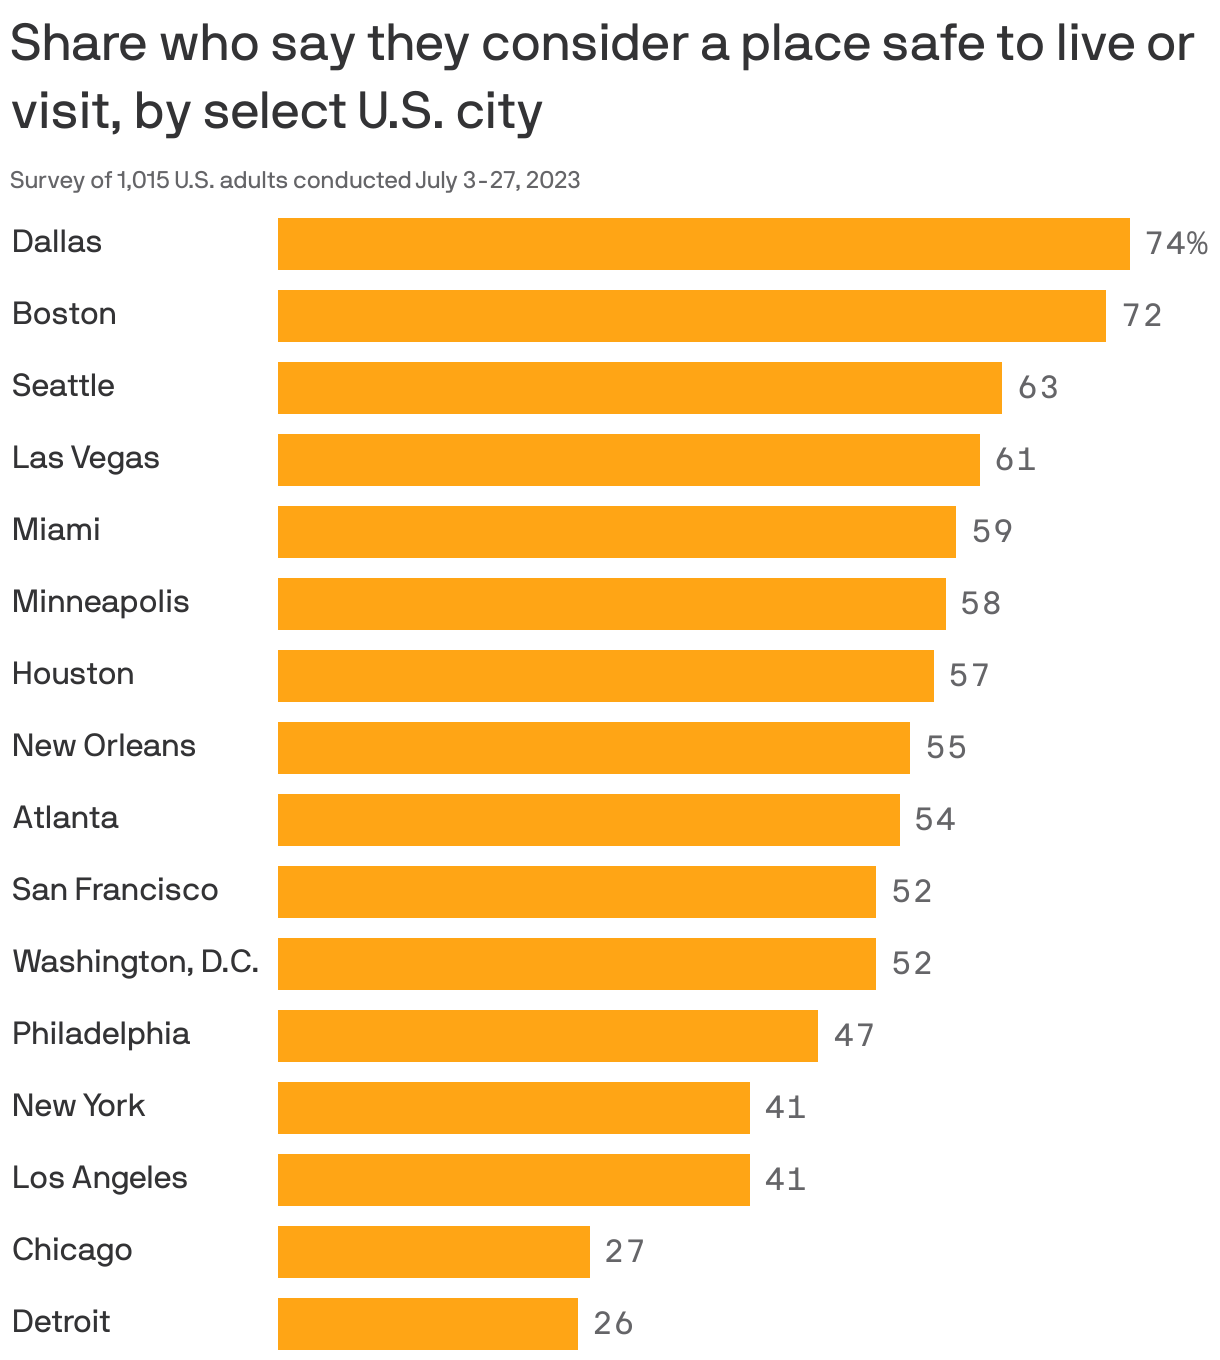 Share who say they consider a place safe to live or visit, by select U.S. city